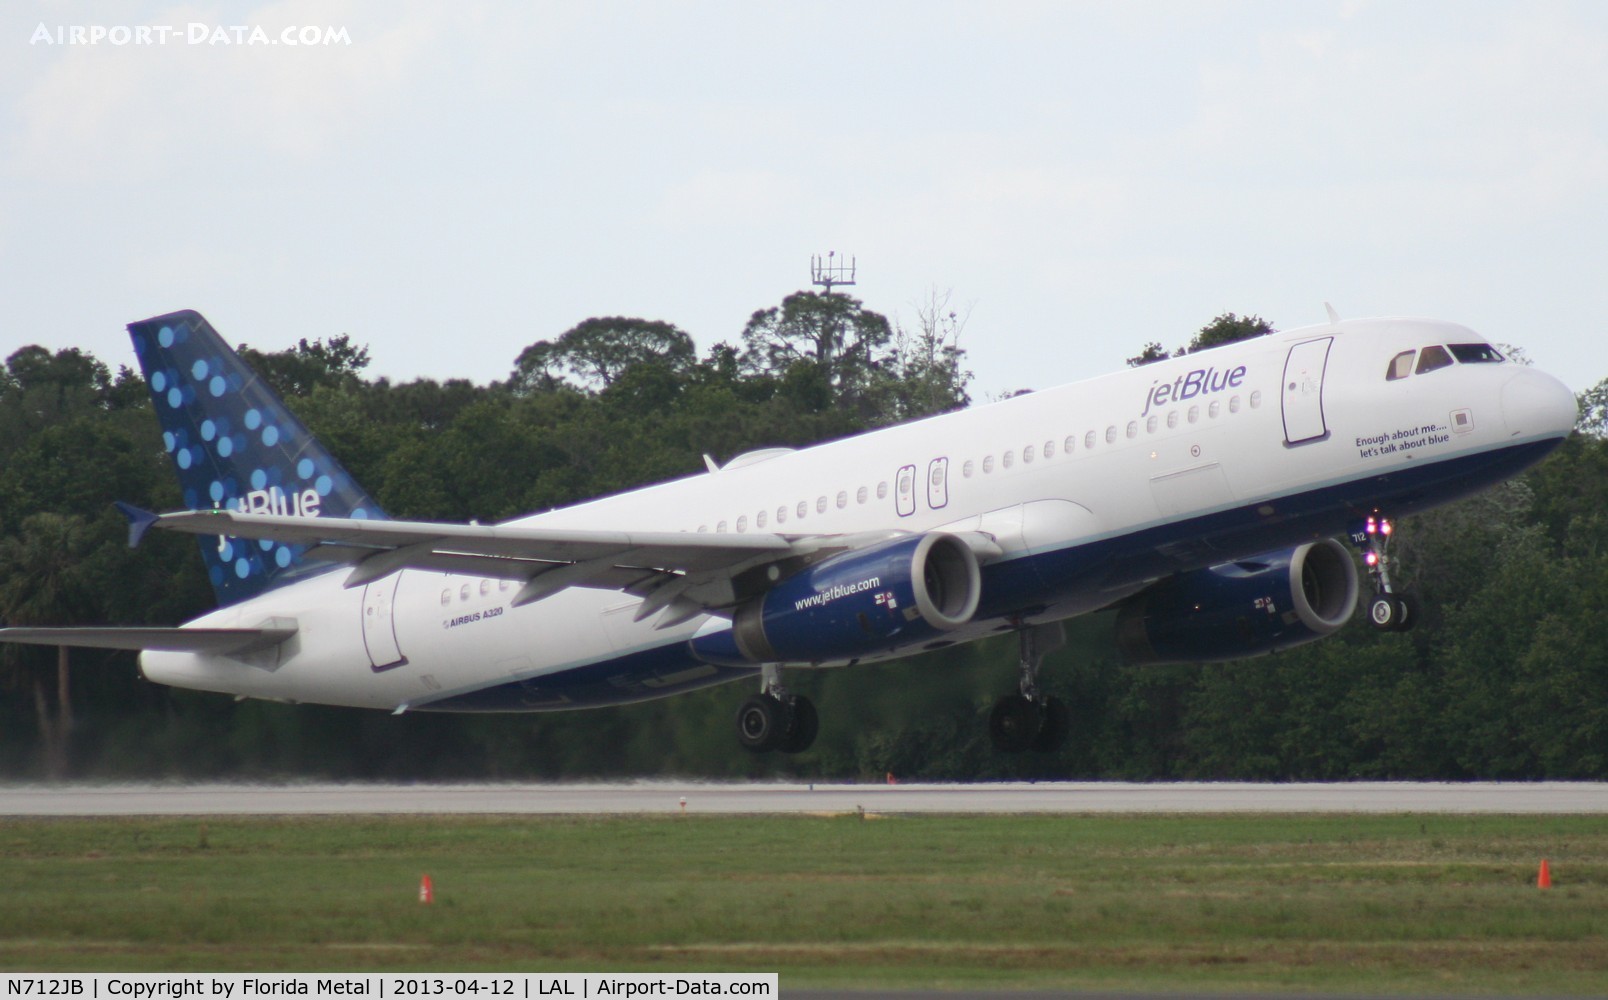 N712JB, 2008 Airbus A320-232 C/N 3517, Jet Blue A320 departing Lakeland with Make a Wish Foundation kids